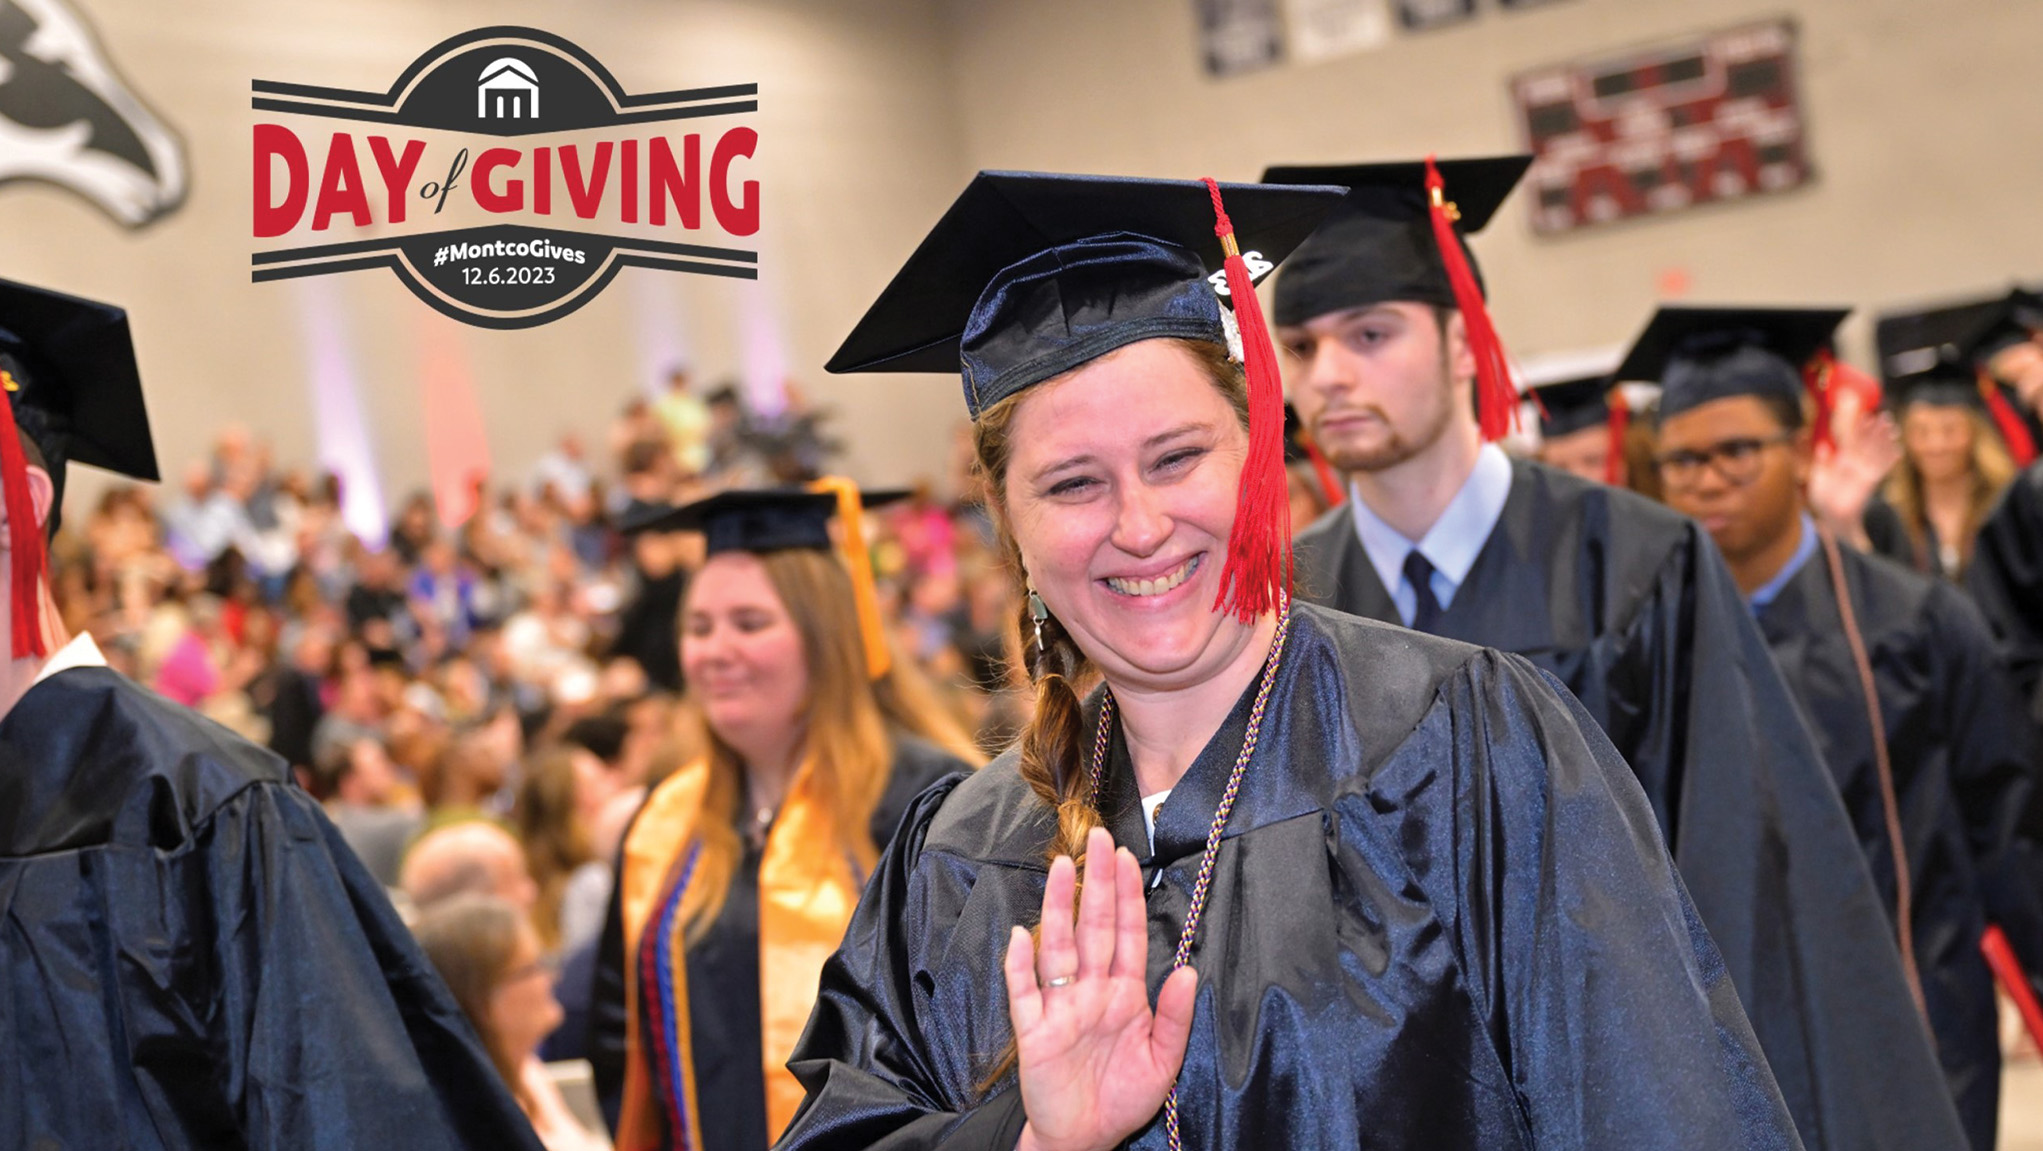 Graduate waving with Day of Giving logo